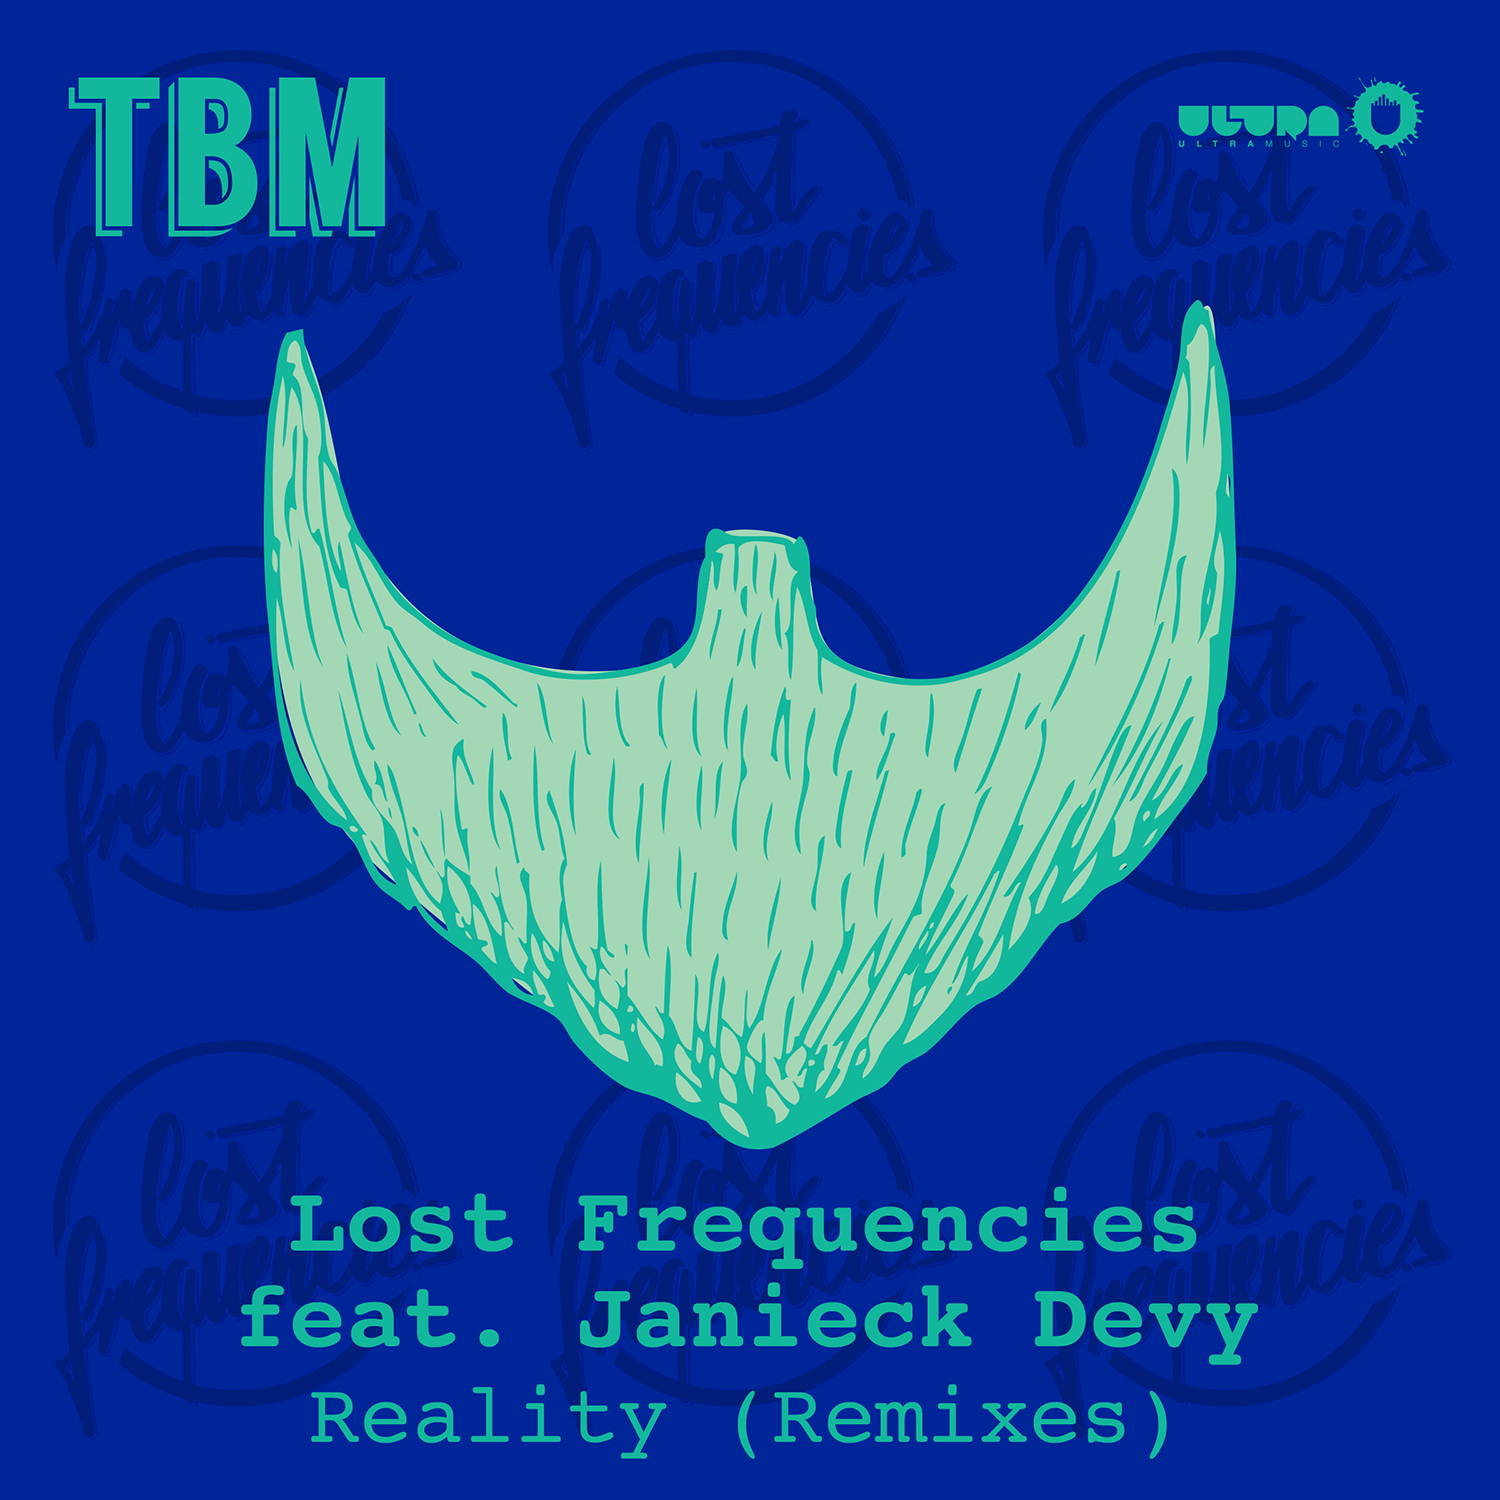 Lost Frequencies feat. Janieck Devy - Reality (feat. Janieck Devy) картинки